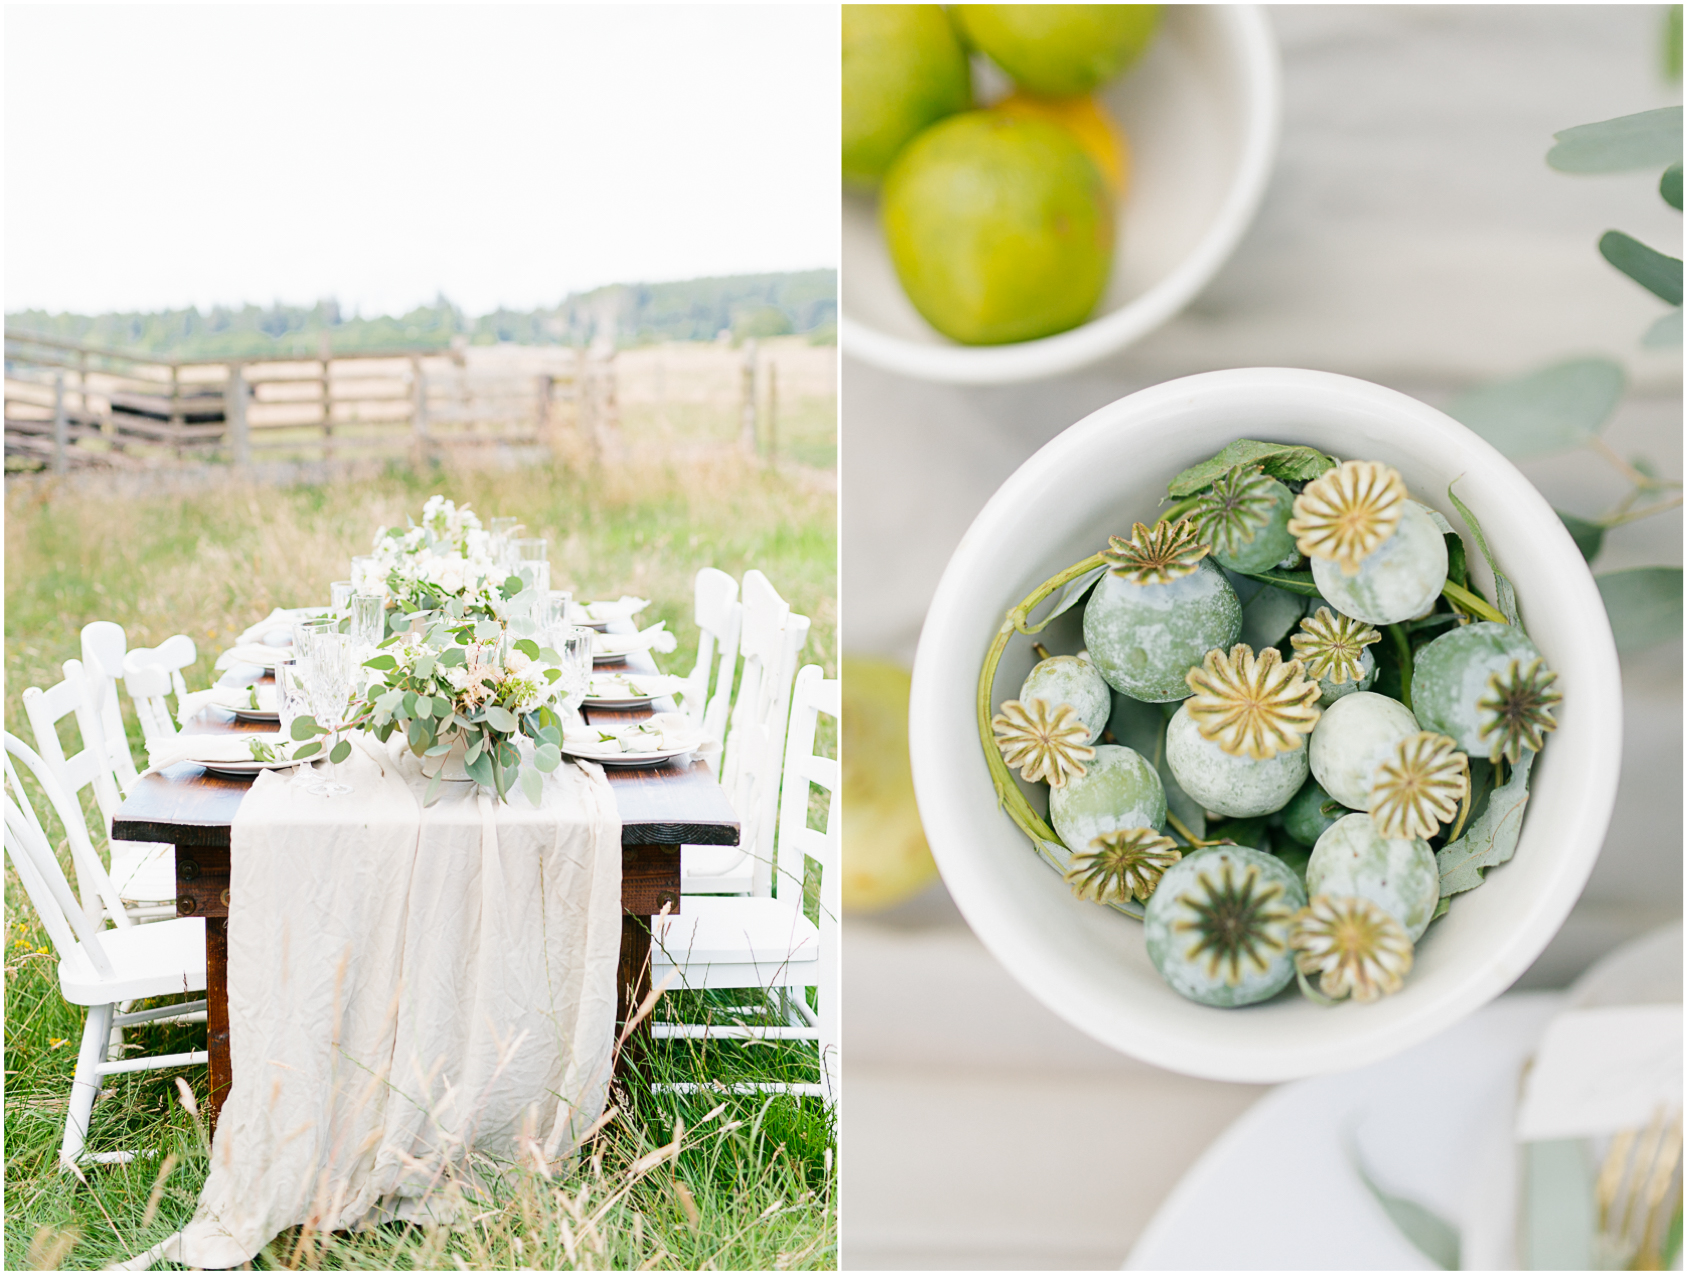 Dream Chasers Workshop on Rose Ranch | Emma Rose Company Education | Styled Shoot on a Ranch | Cattle Ranch Wedding | Rose Ranch Washington Wedding | Dream Chasers with Cameras | Styled Shoot | Gorgeous Table Setting on a Ranch Wedding.jpg